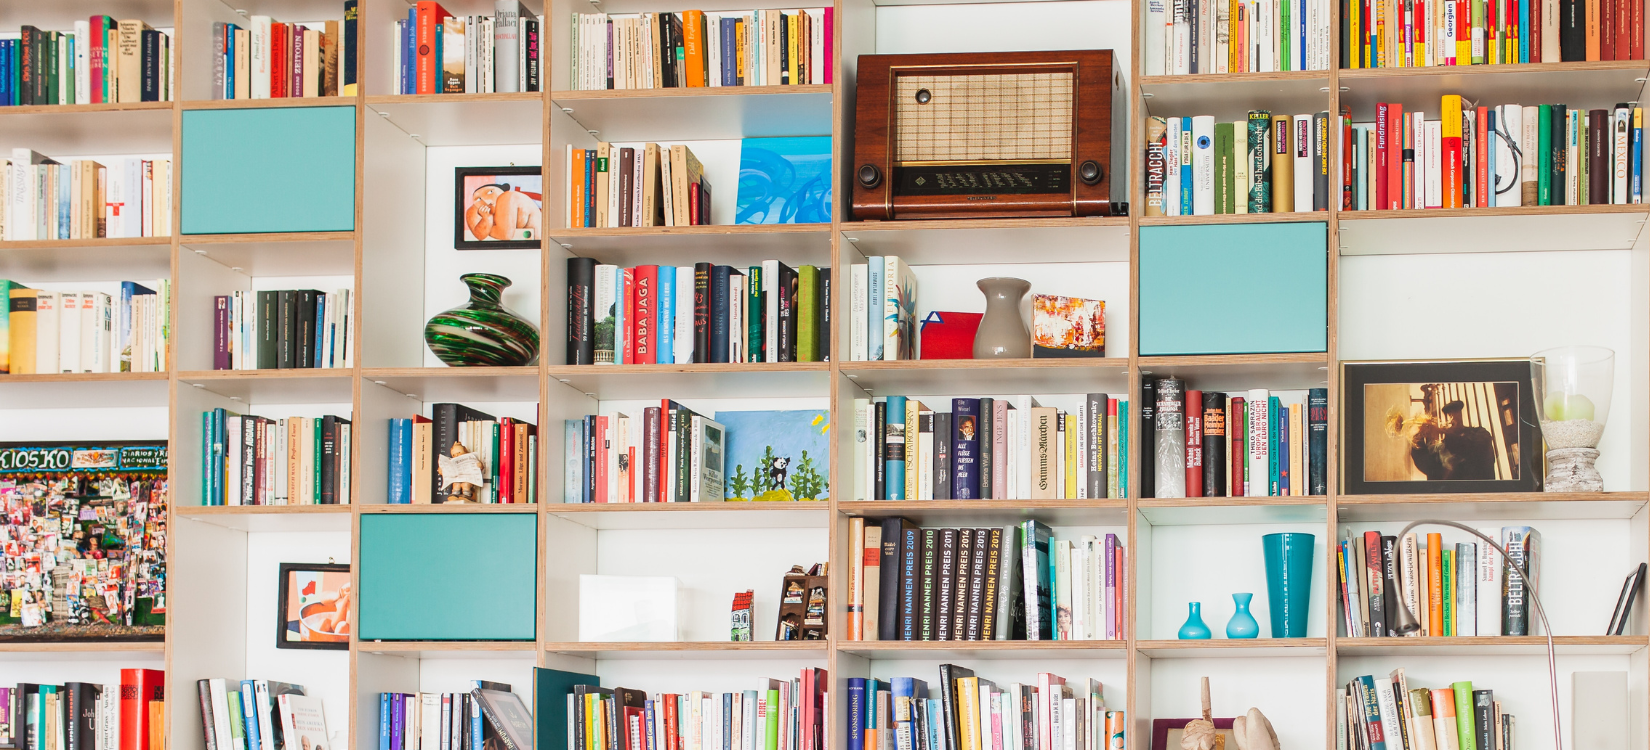 A colourful home library.